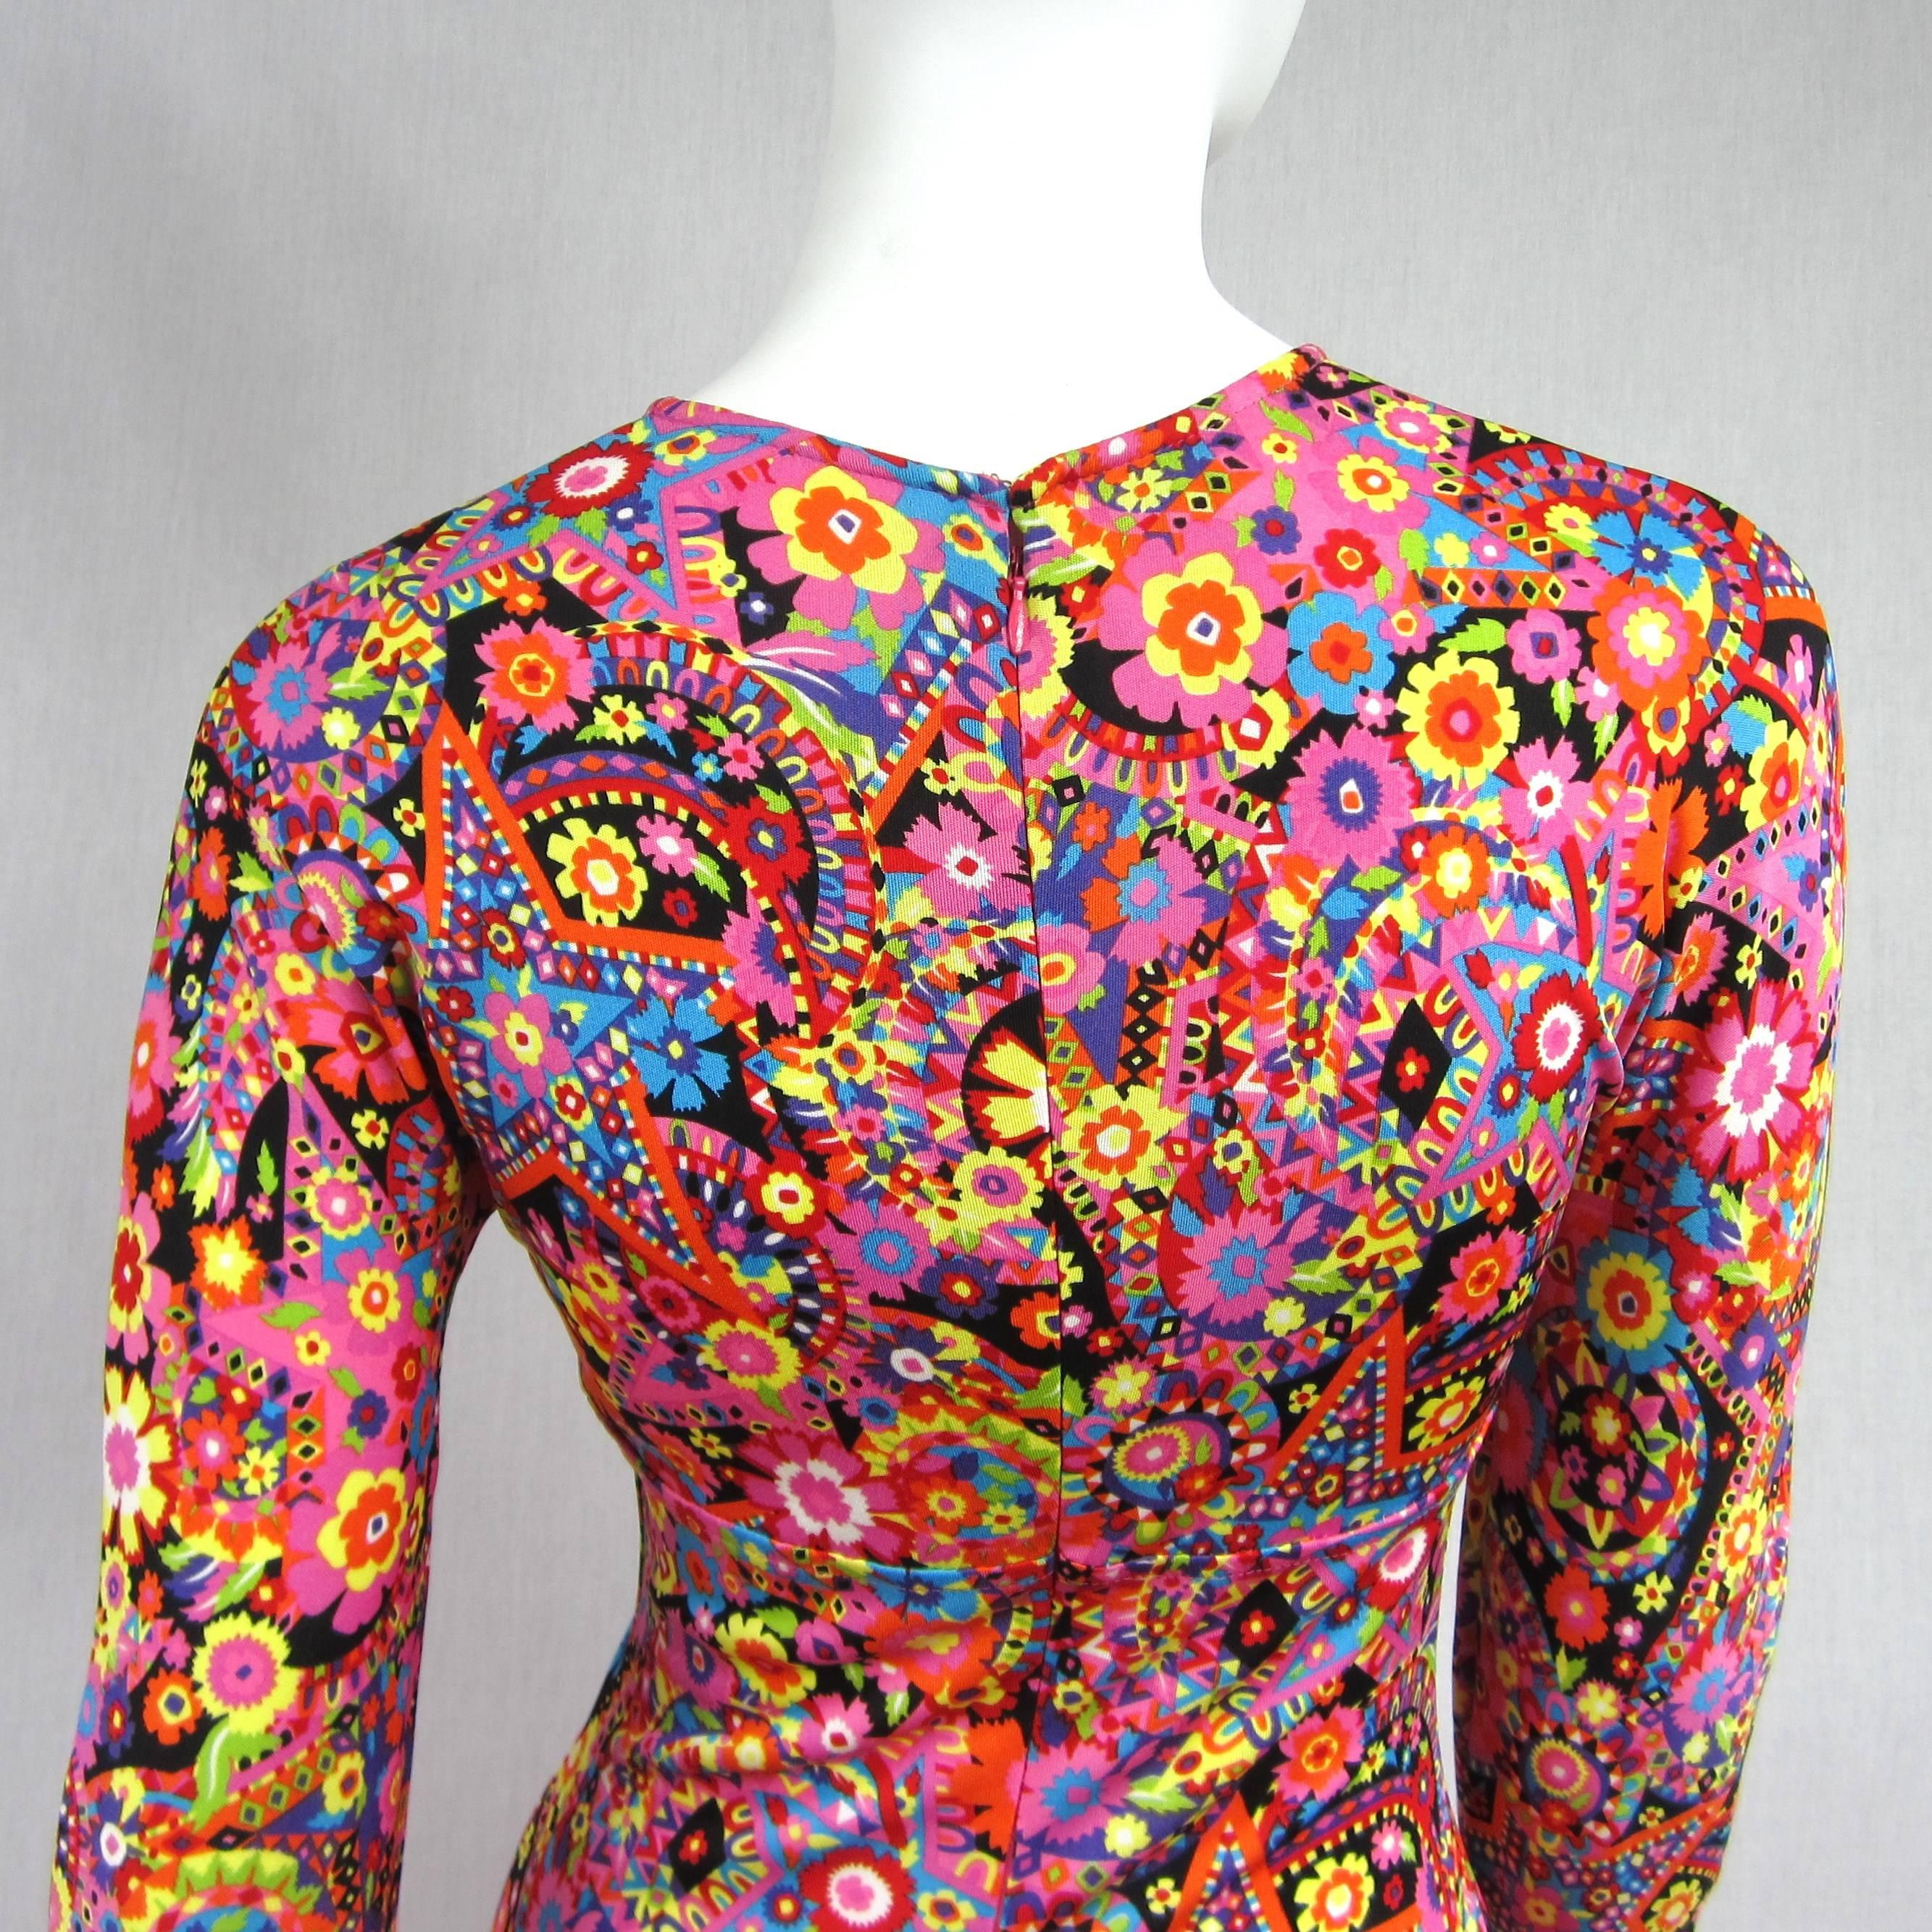 Women's Gianni Versace Couture Floral Abstract Dress 2002 For Sale